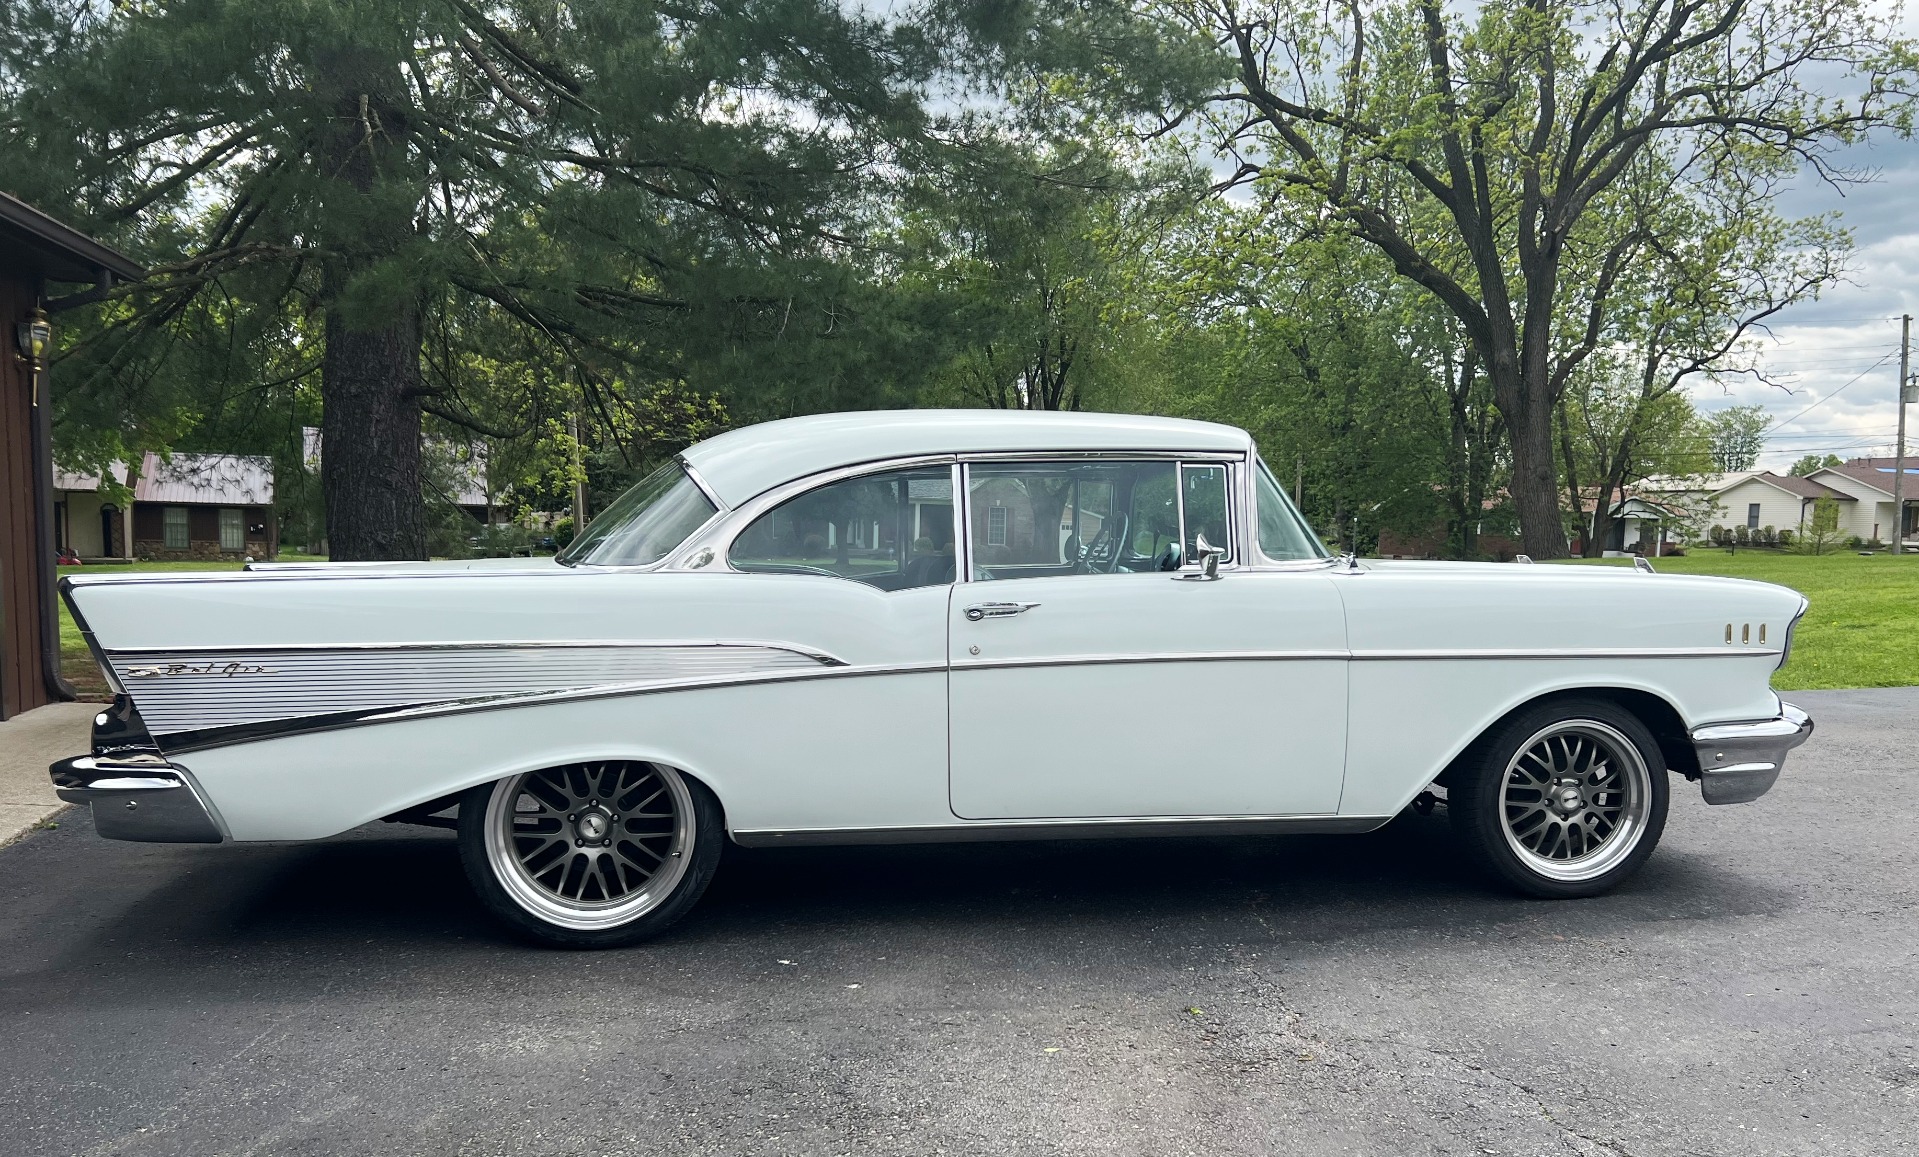 Used 1957 Chevrolet Bel Air  237 , For Sale $62500, Call Us: (704) 996-3735